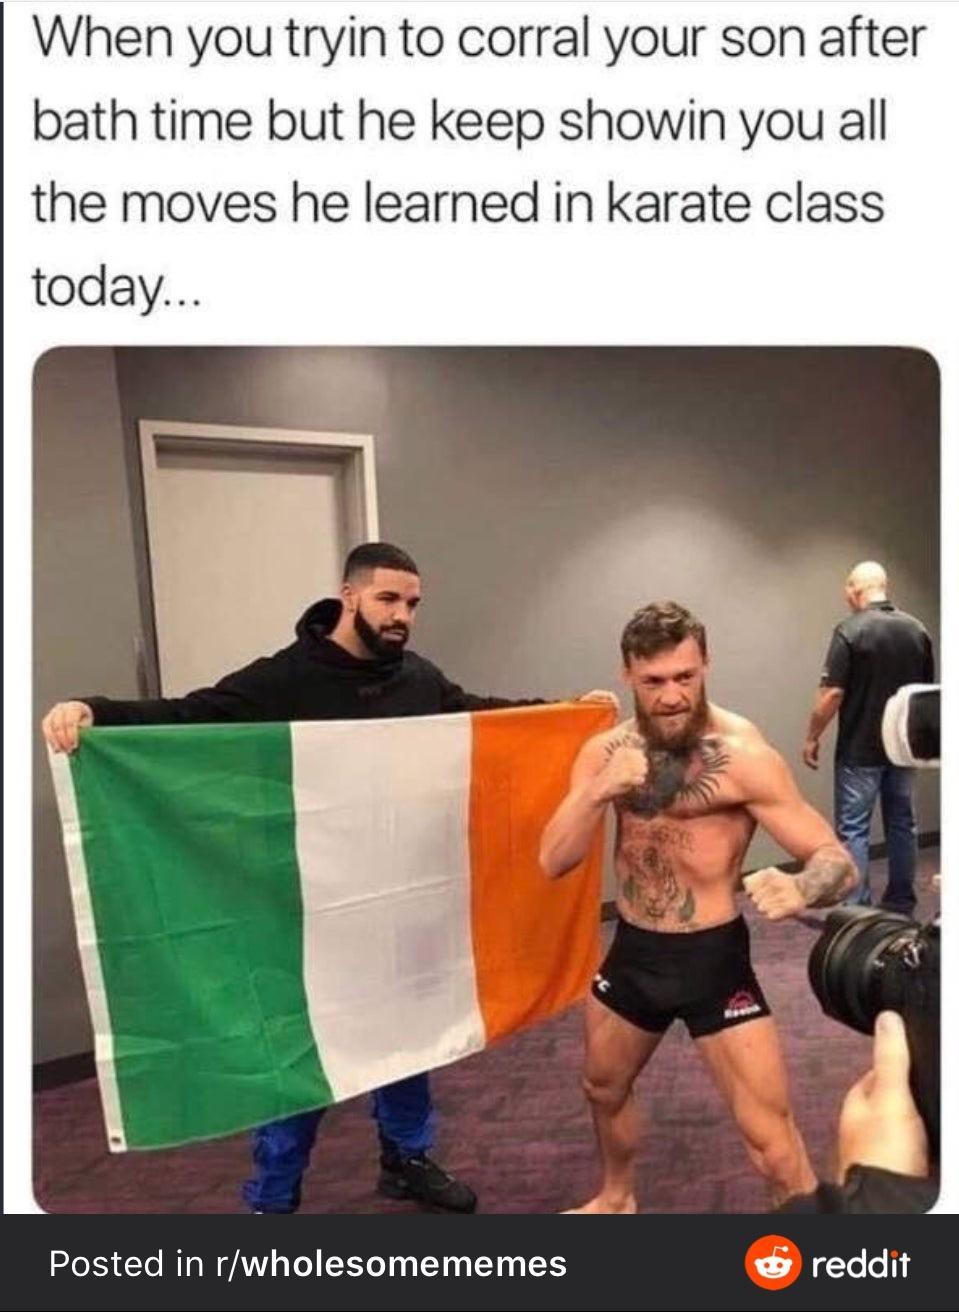 conor mcgregor drake - When you tryin to corral your son after bath time but he keep showin you all the moves he learned in karate class today... Posted in rwholesomememes reddit